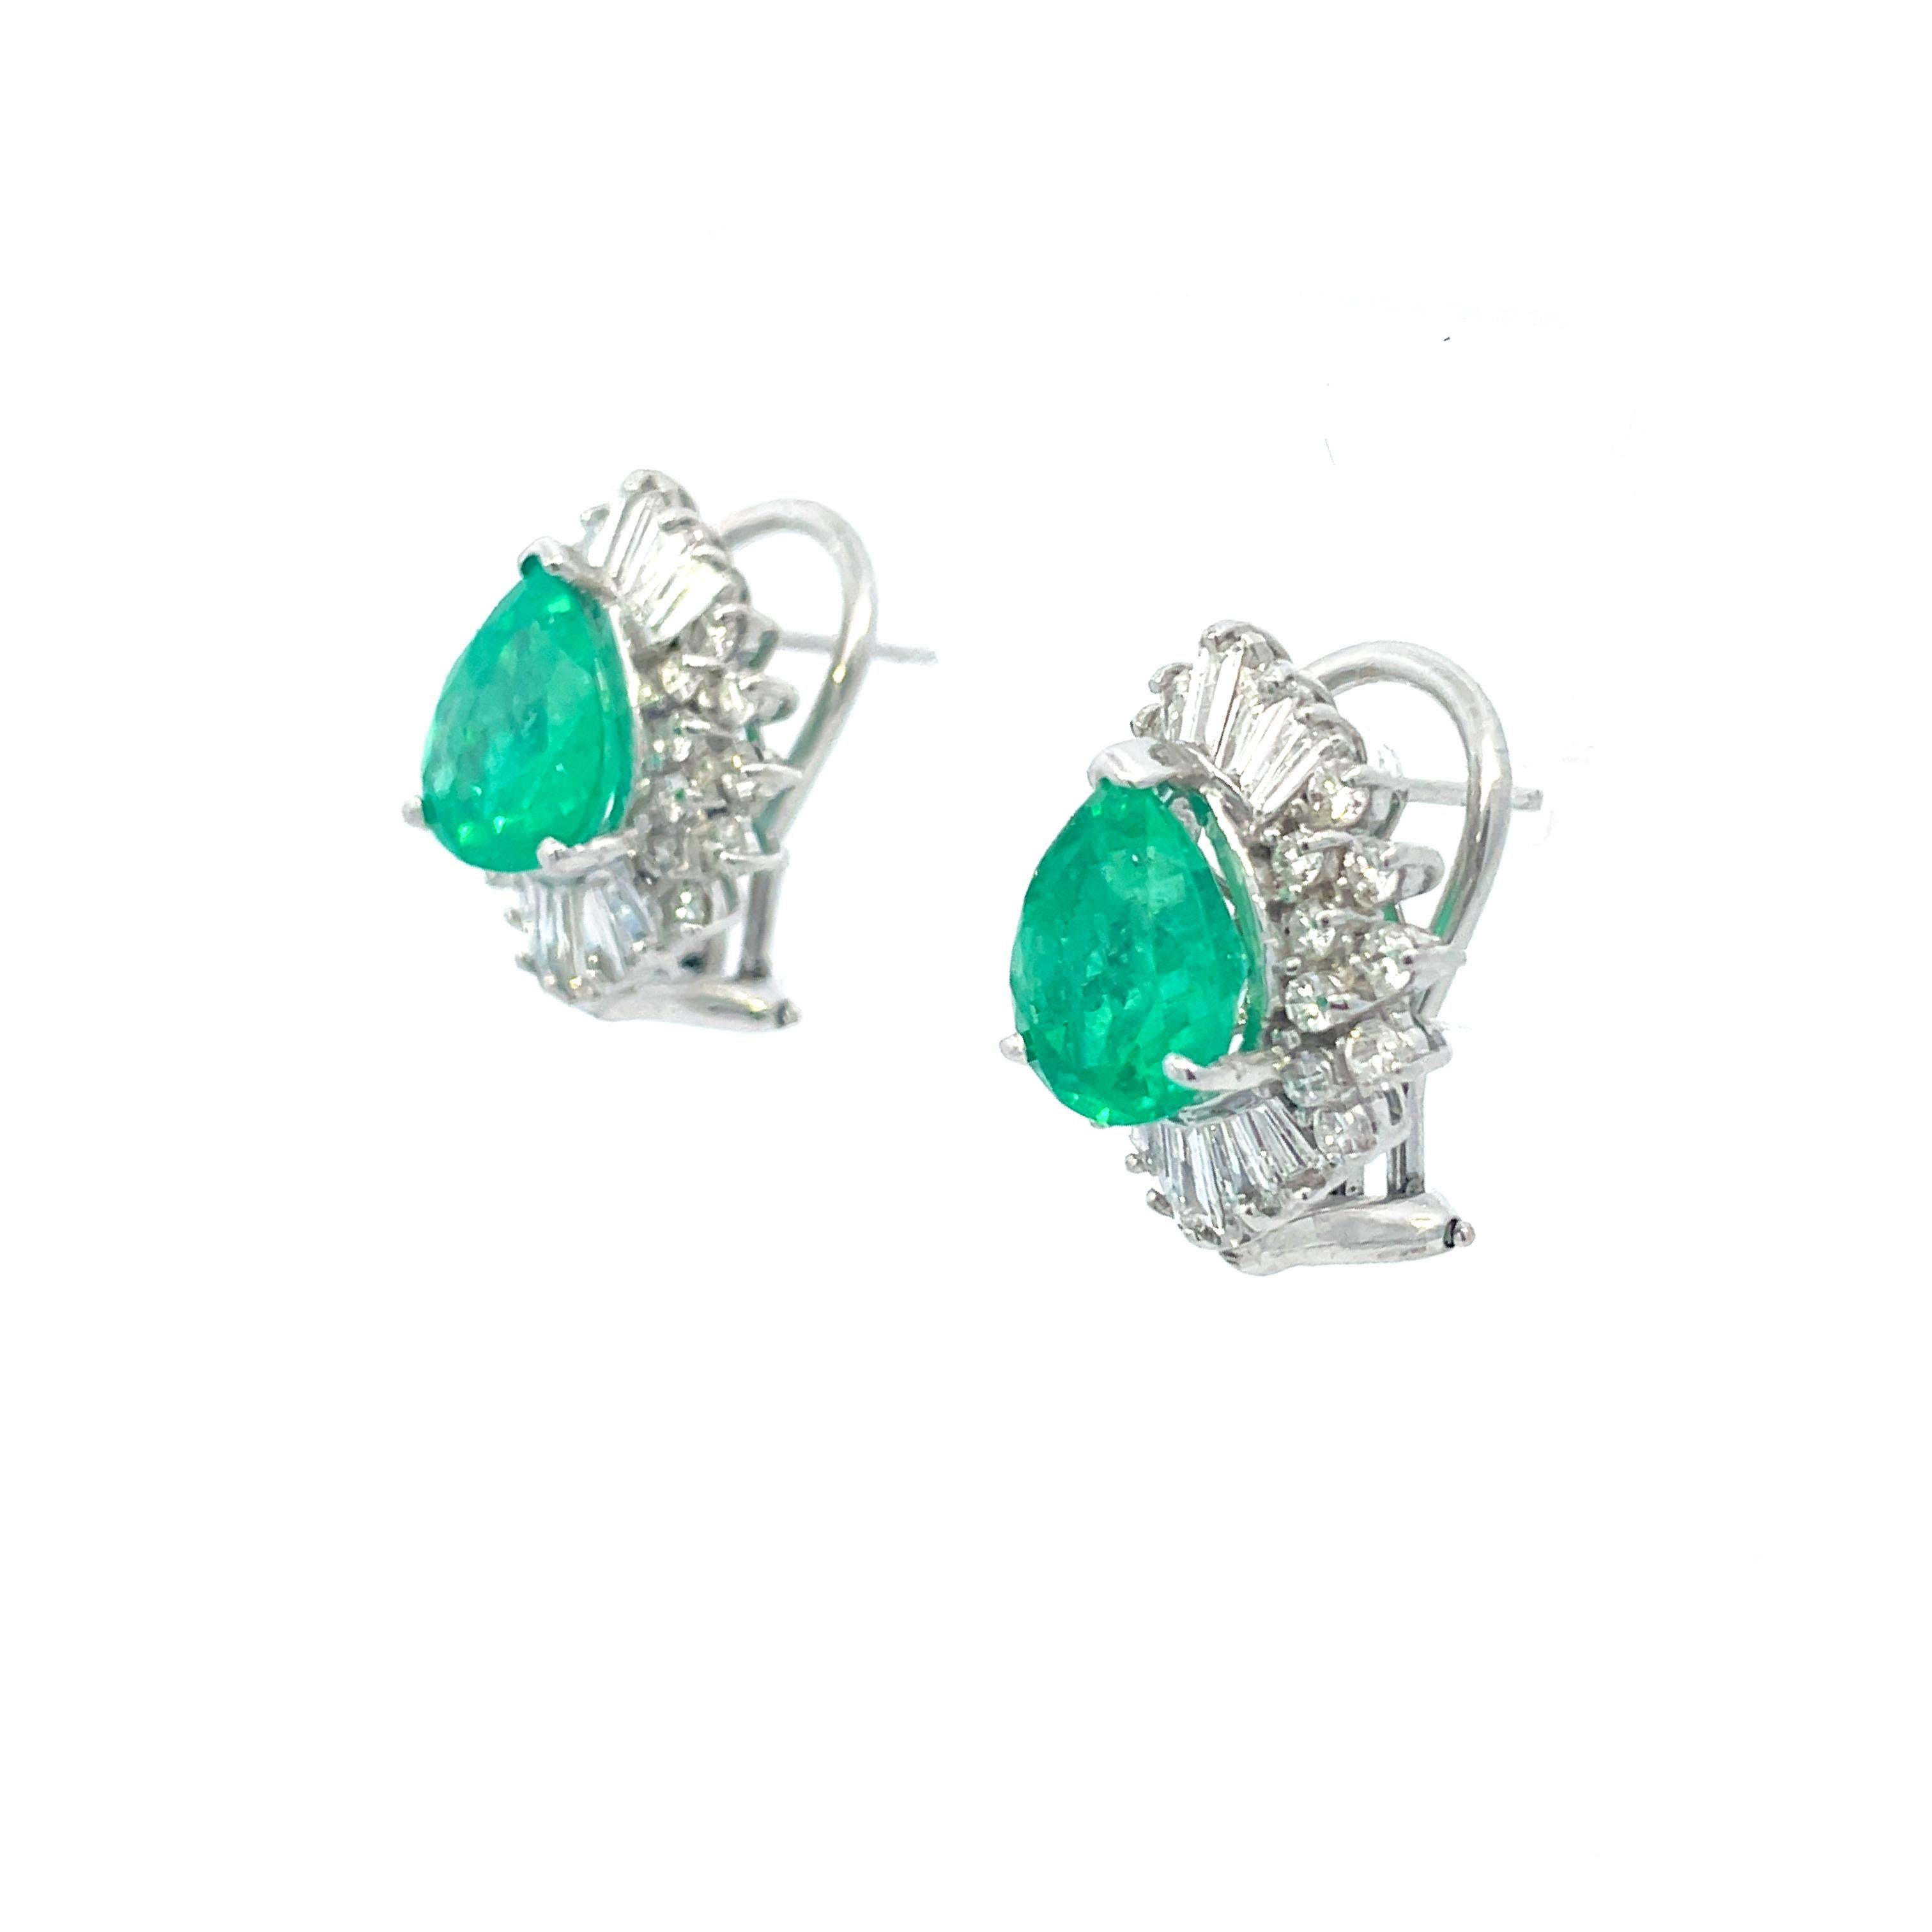 14K White Gold Pear Shaped Emerald and Diamond Earrings with AGL Report In Excellent Condition For Sale In Lexington, KY